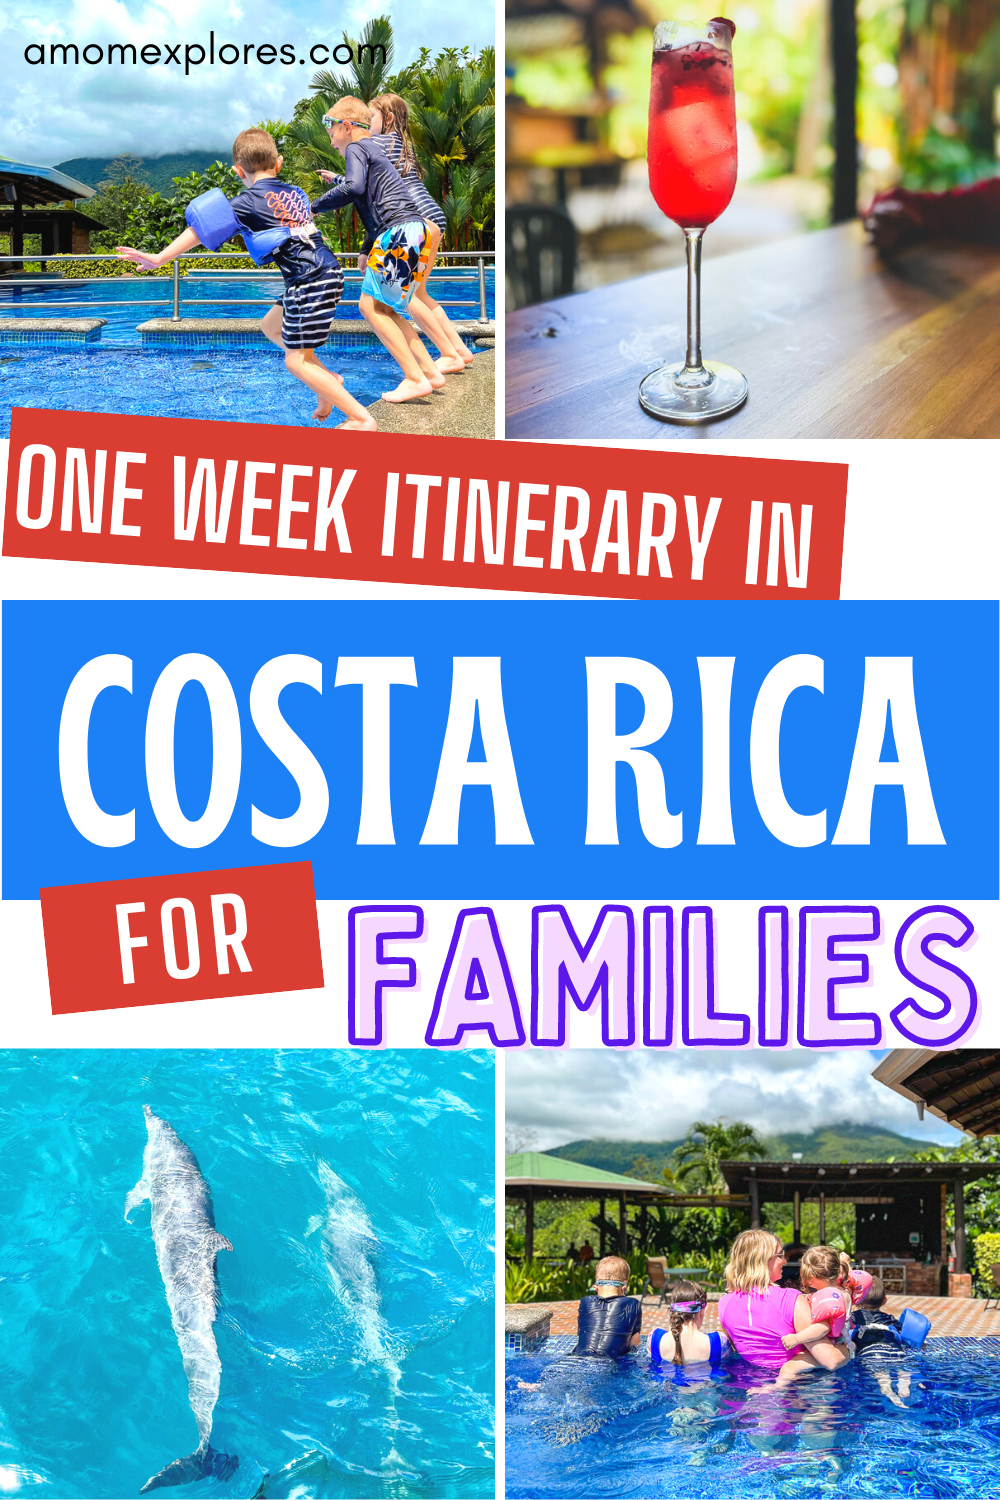 1 WEEK Itinerary in Costa Rica for Families.png